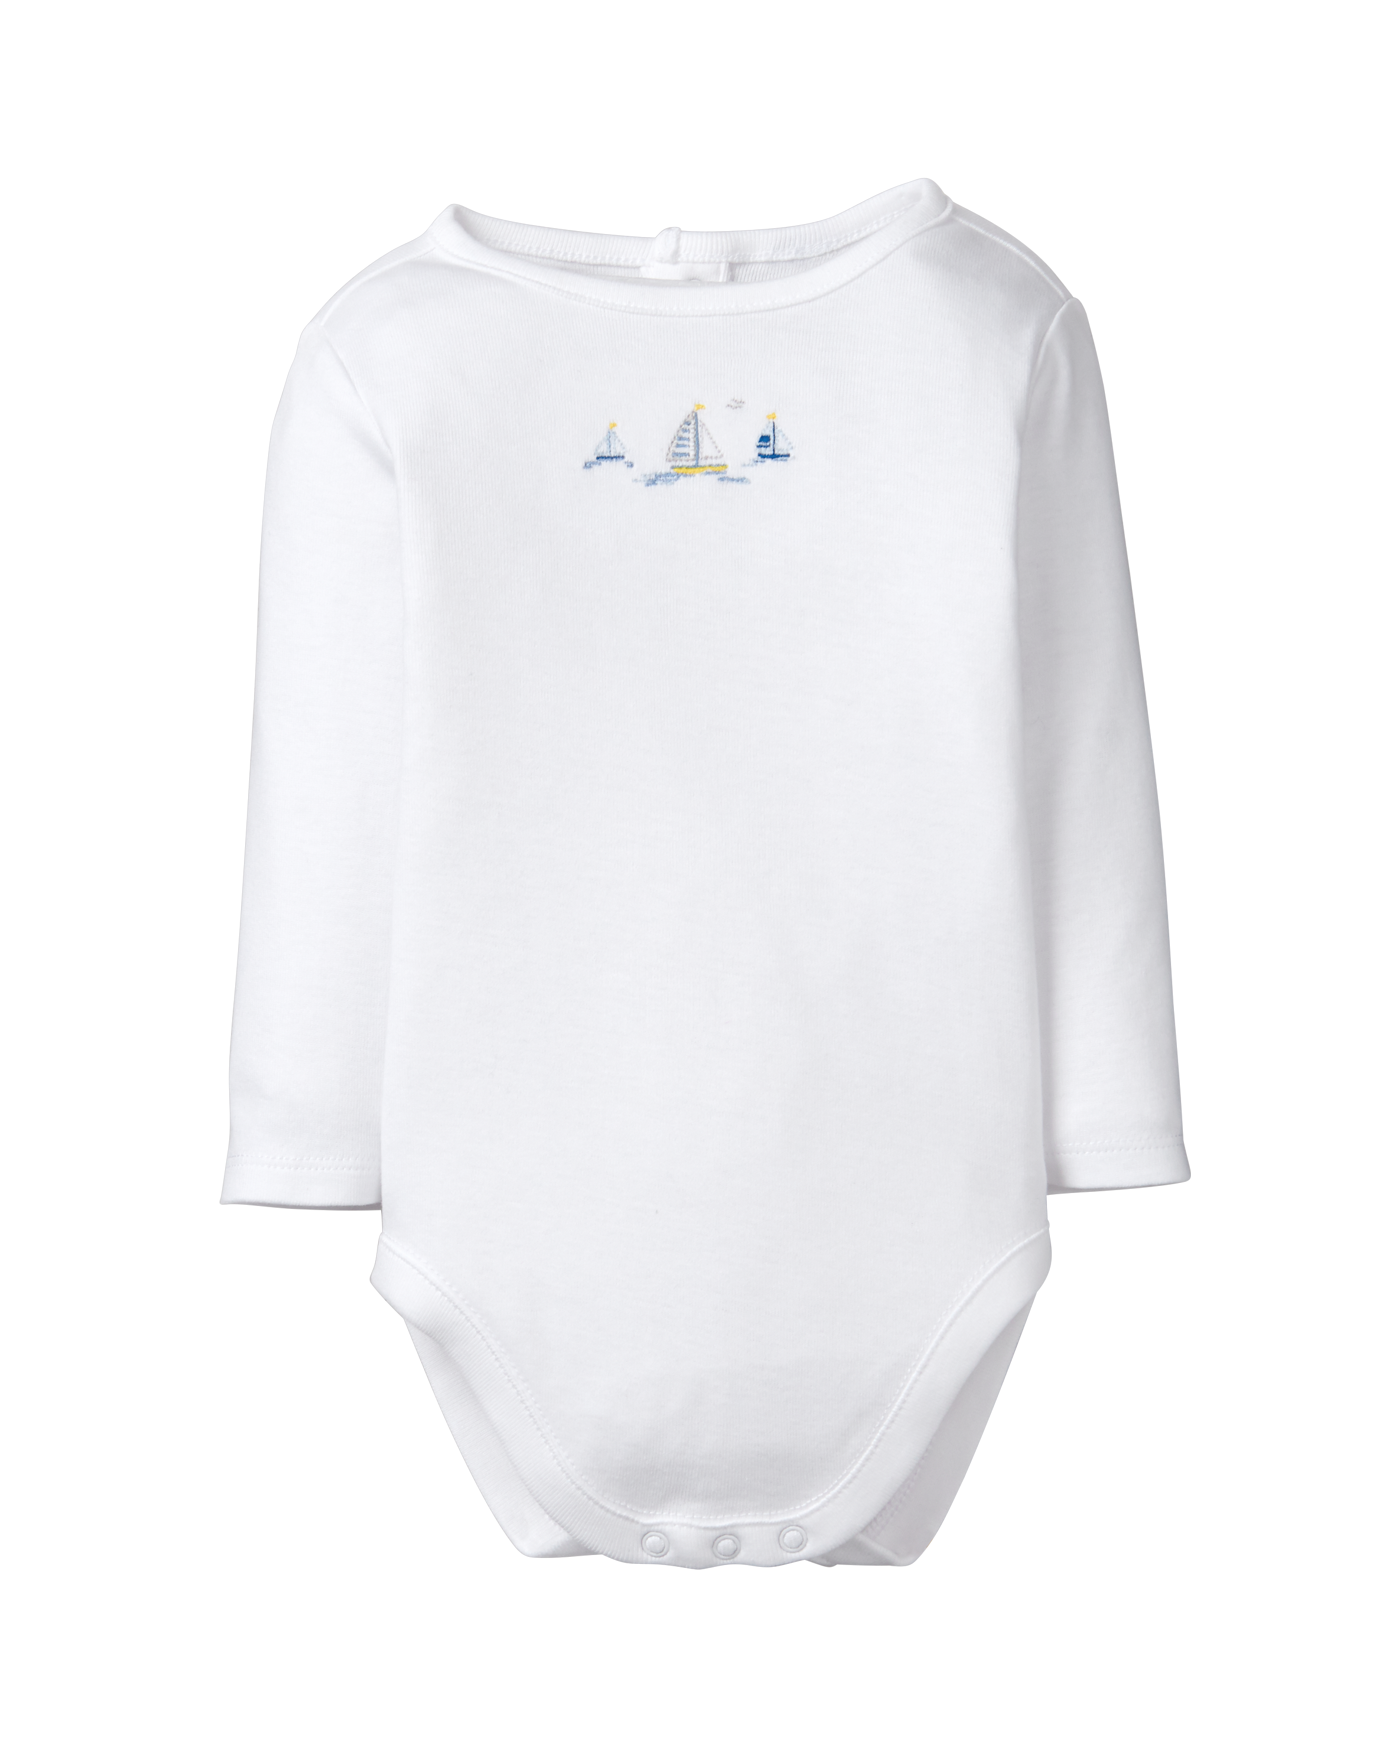 Embroidered Sailboat Bodysuit